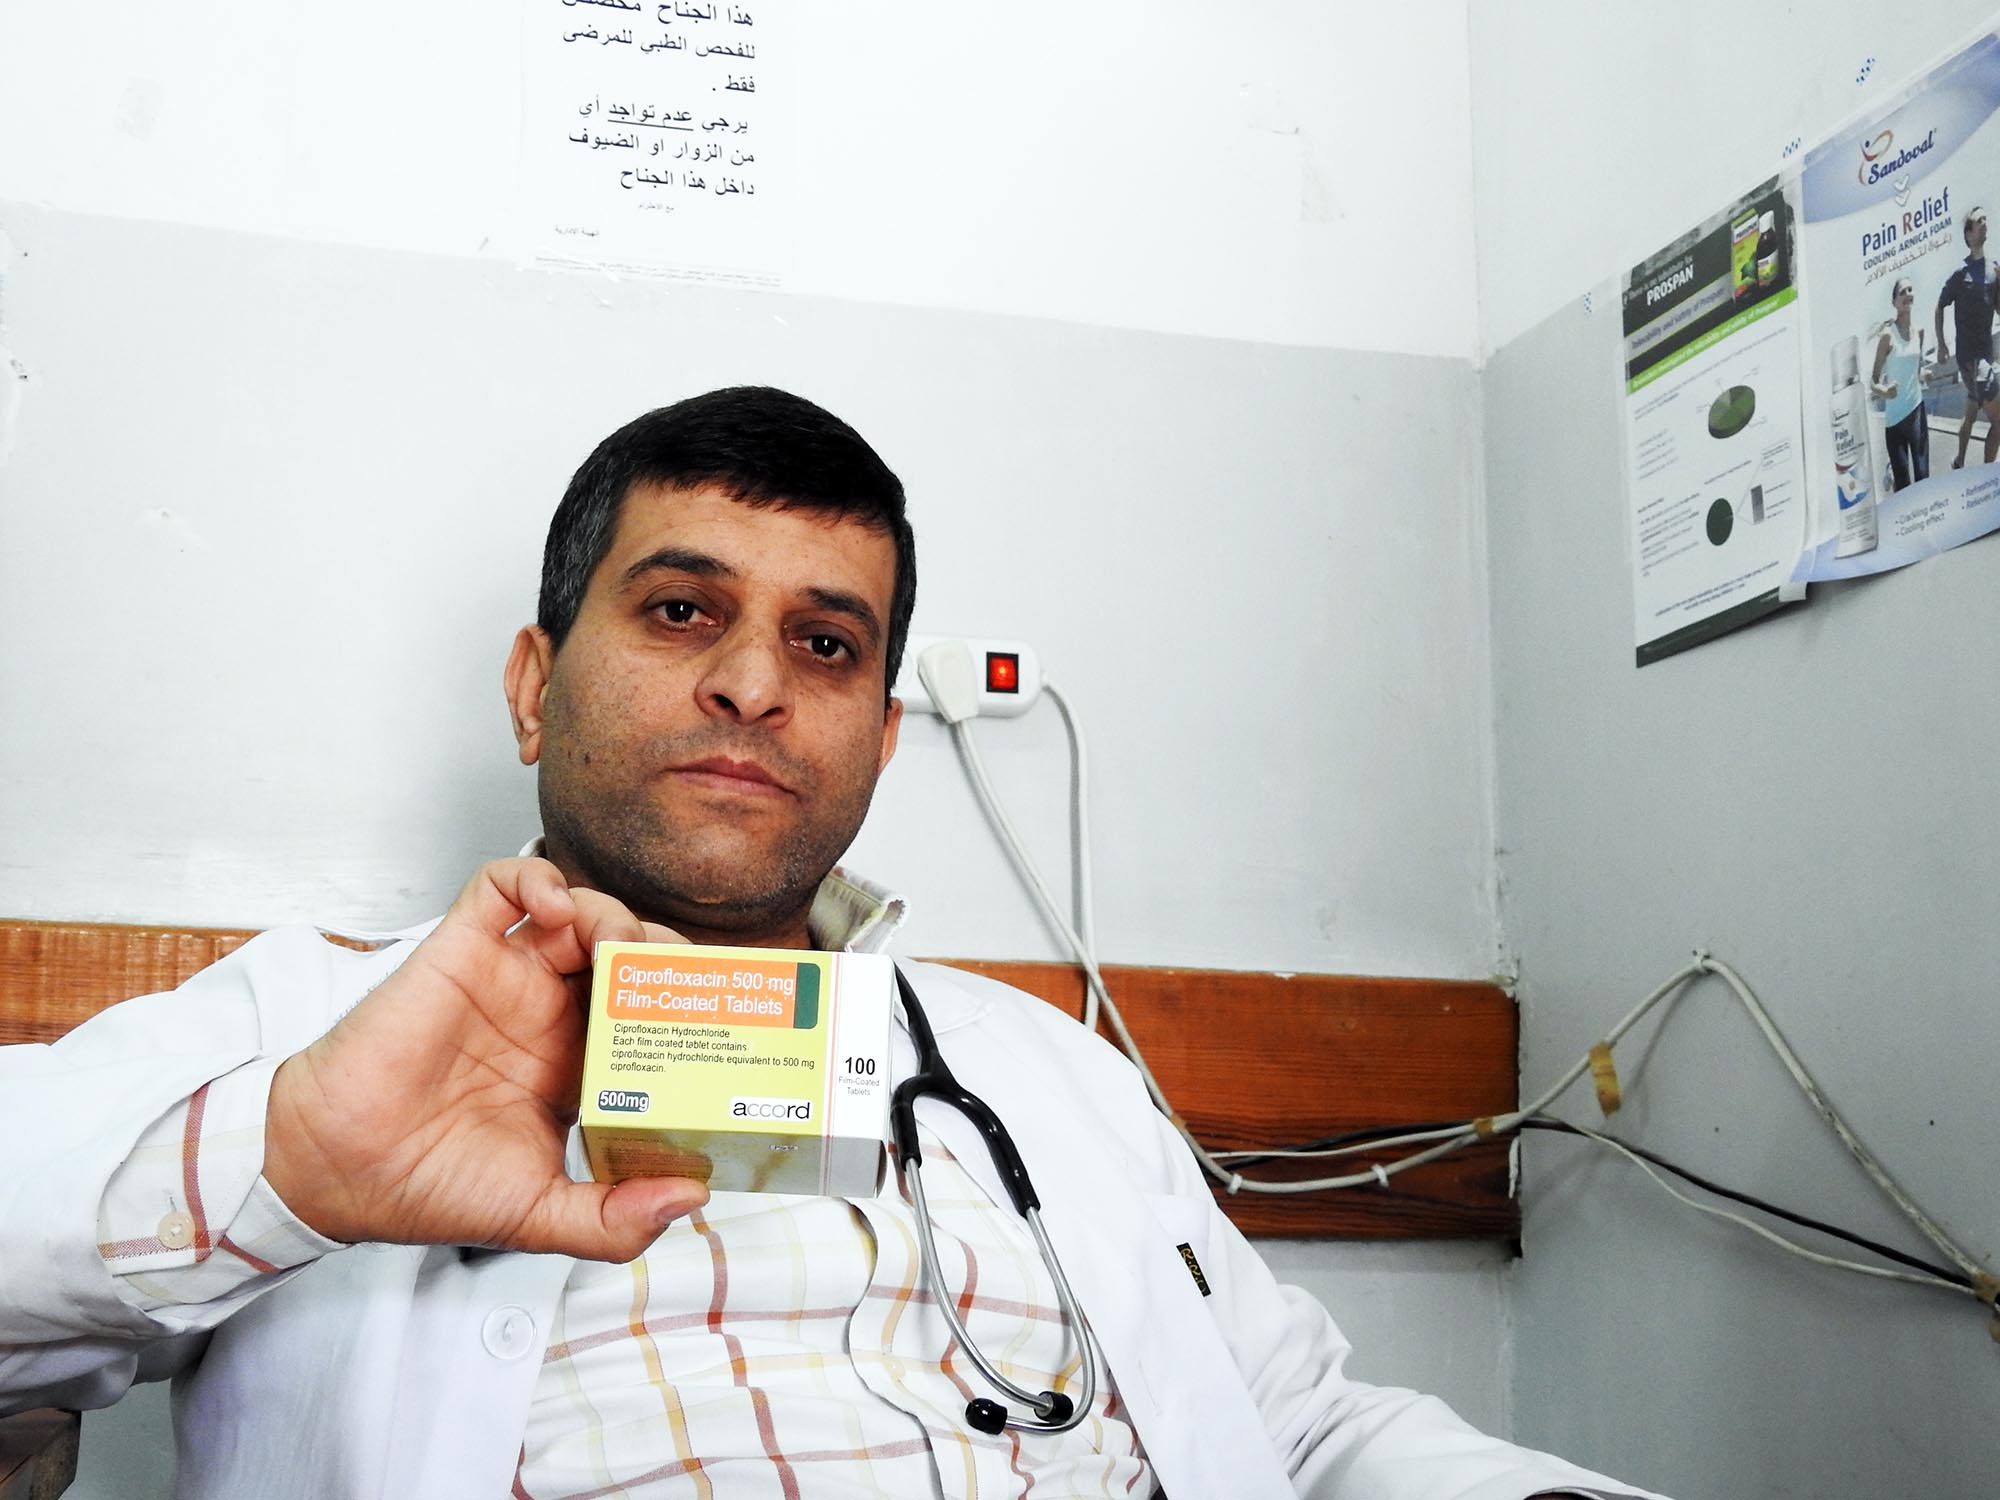 Dr. Ismael holding the donated medicine which he prescribed for a UTI.